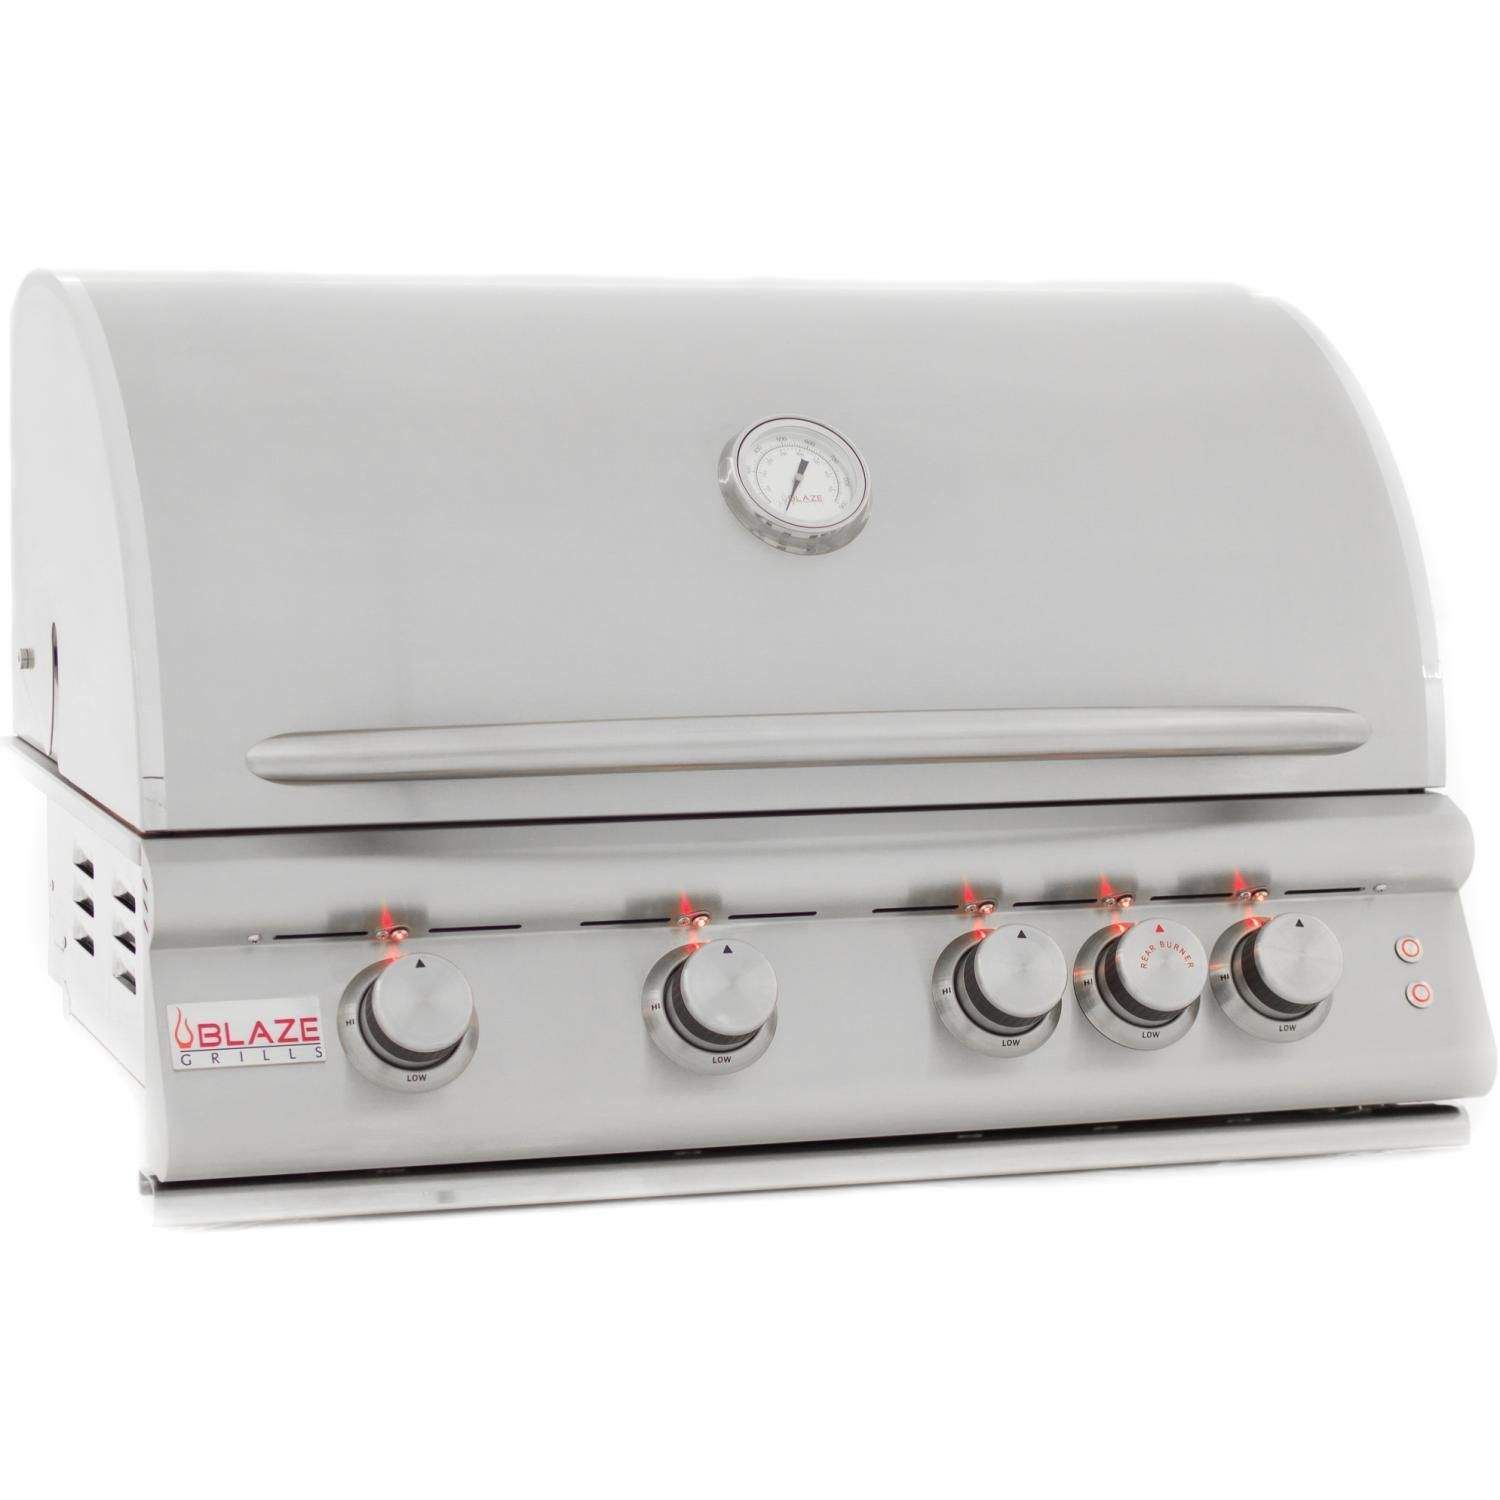 Blaze BLZ-4LTE-LP Built-In Propane Gas Grill with Lights, 32-Inch